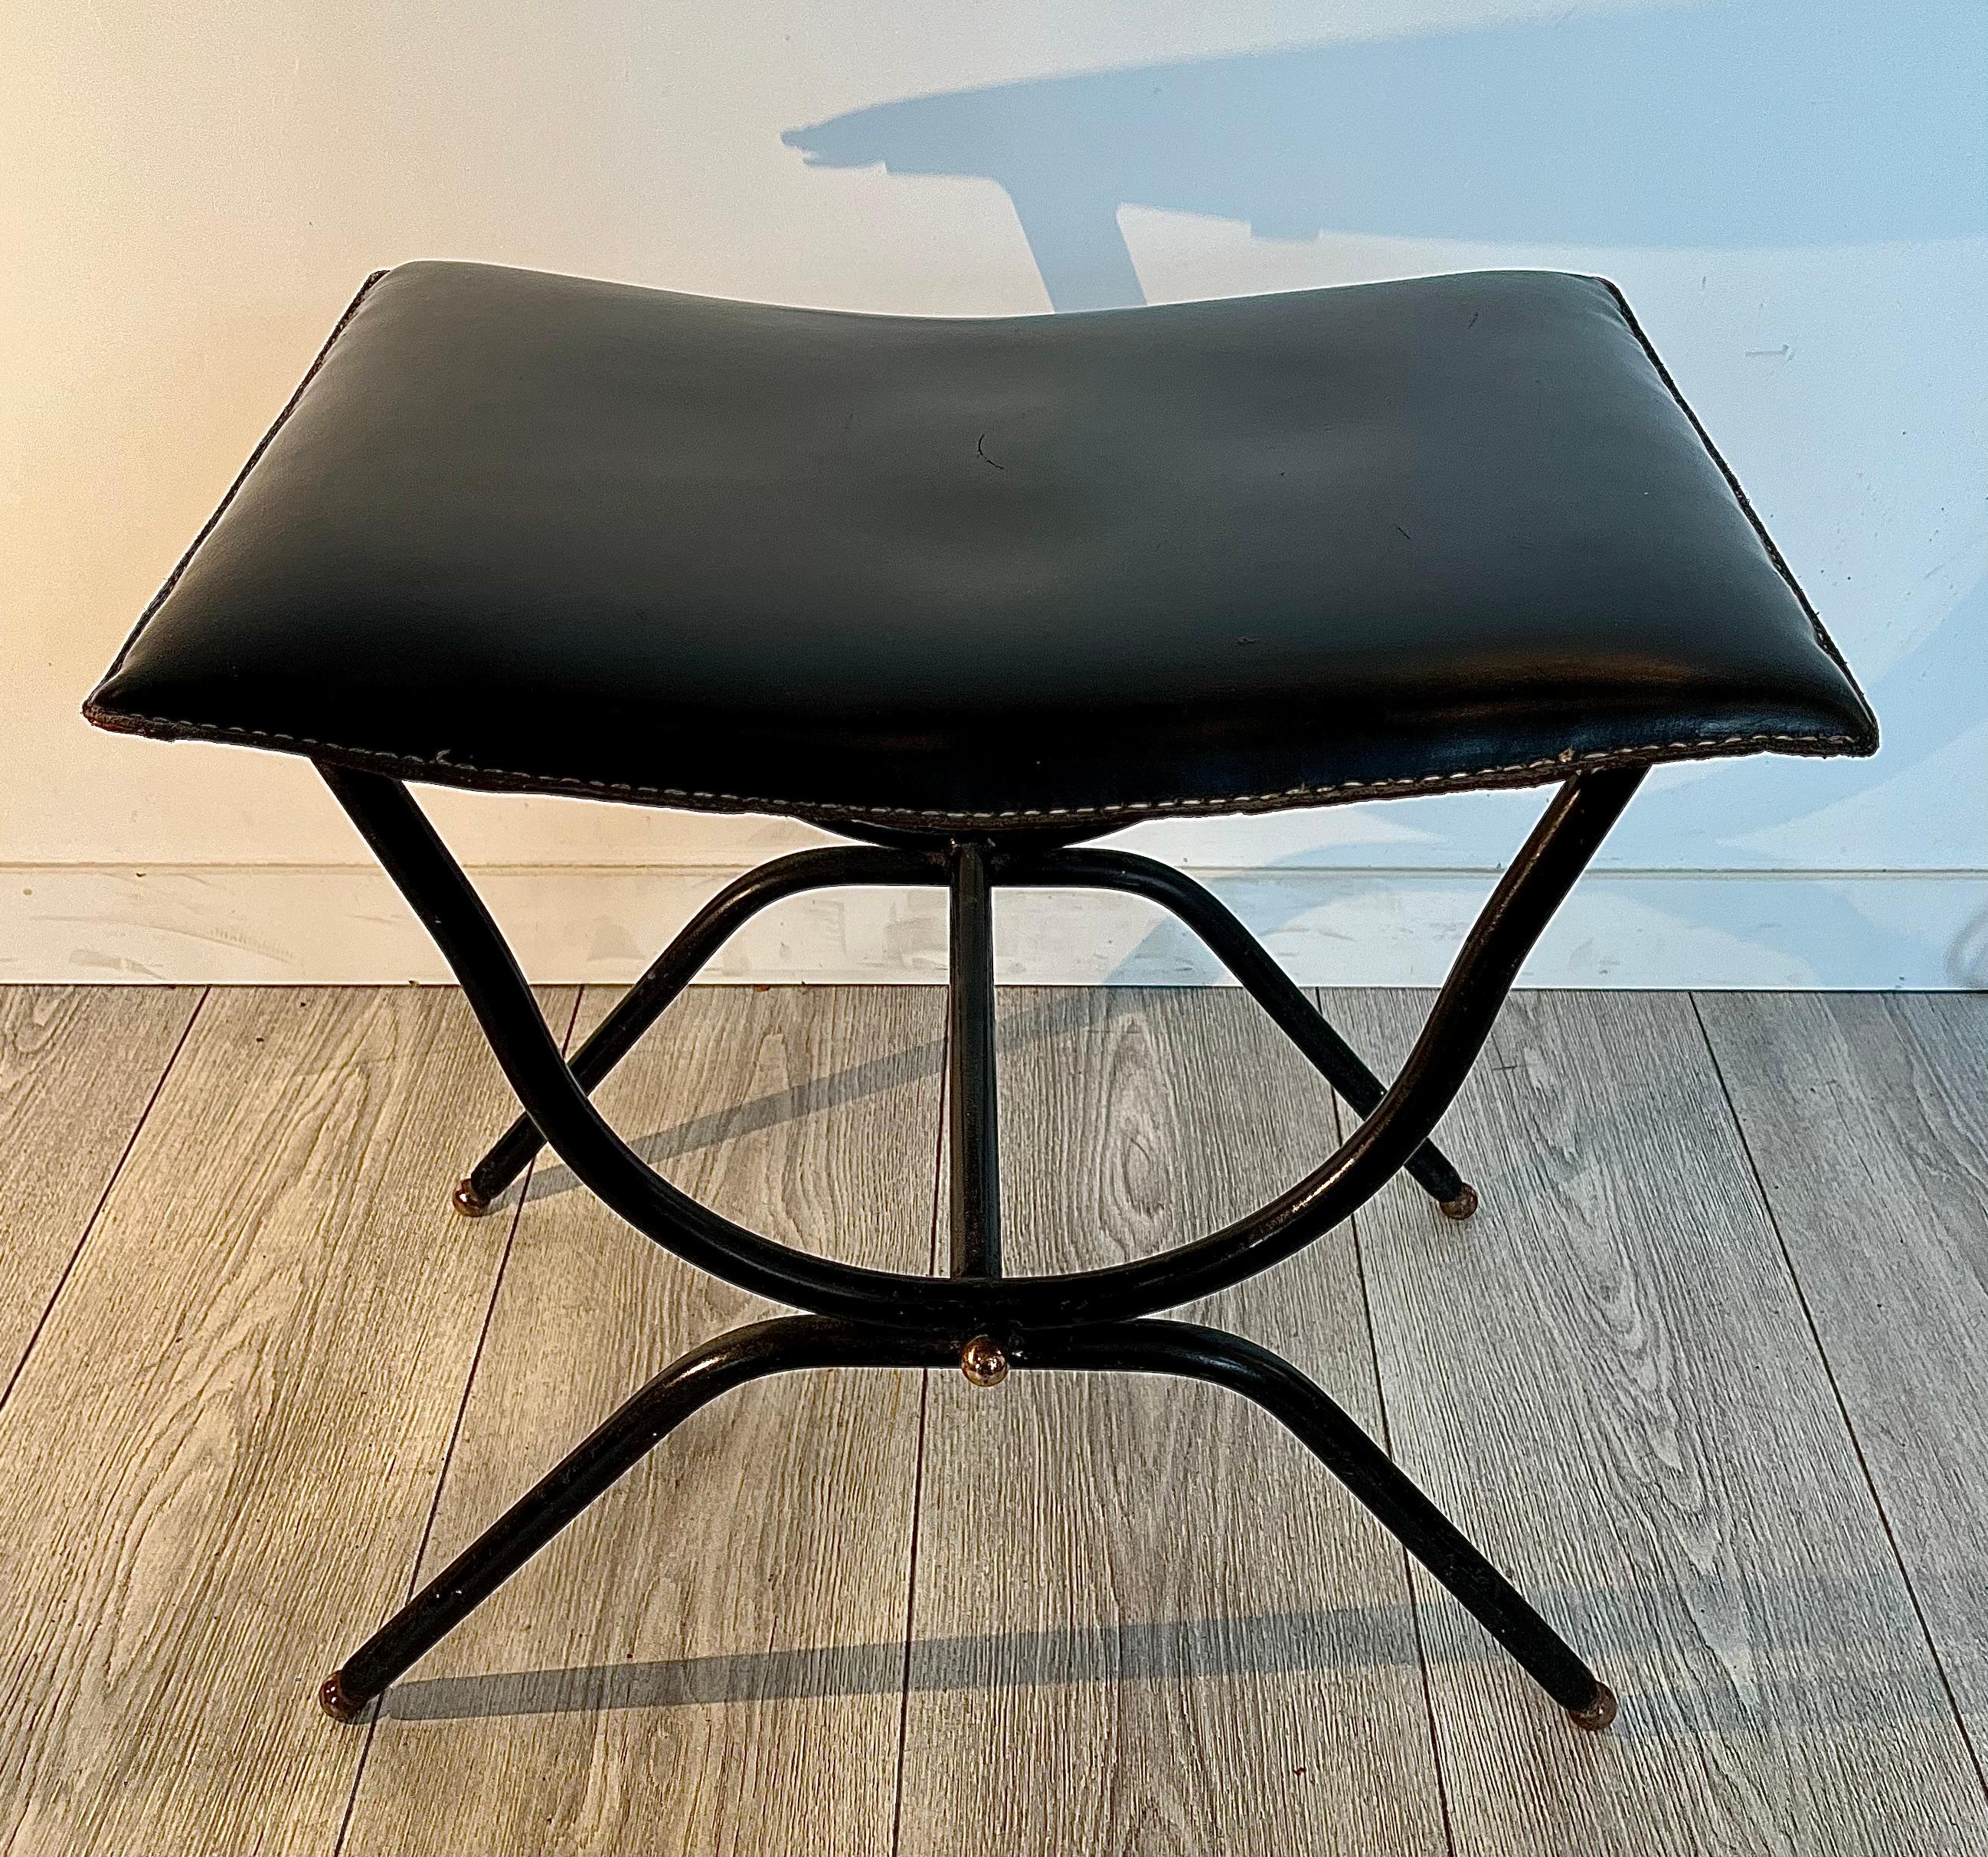 Other Jacques Adnet : Black leather stool, circa 1955